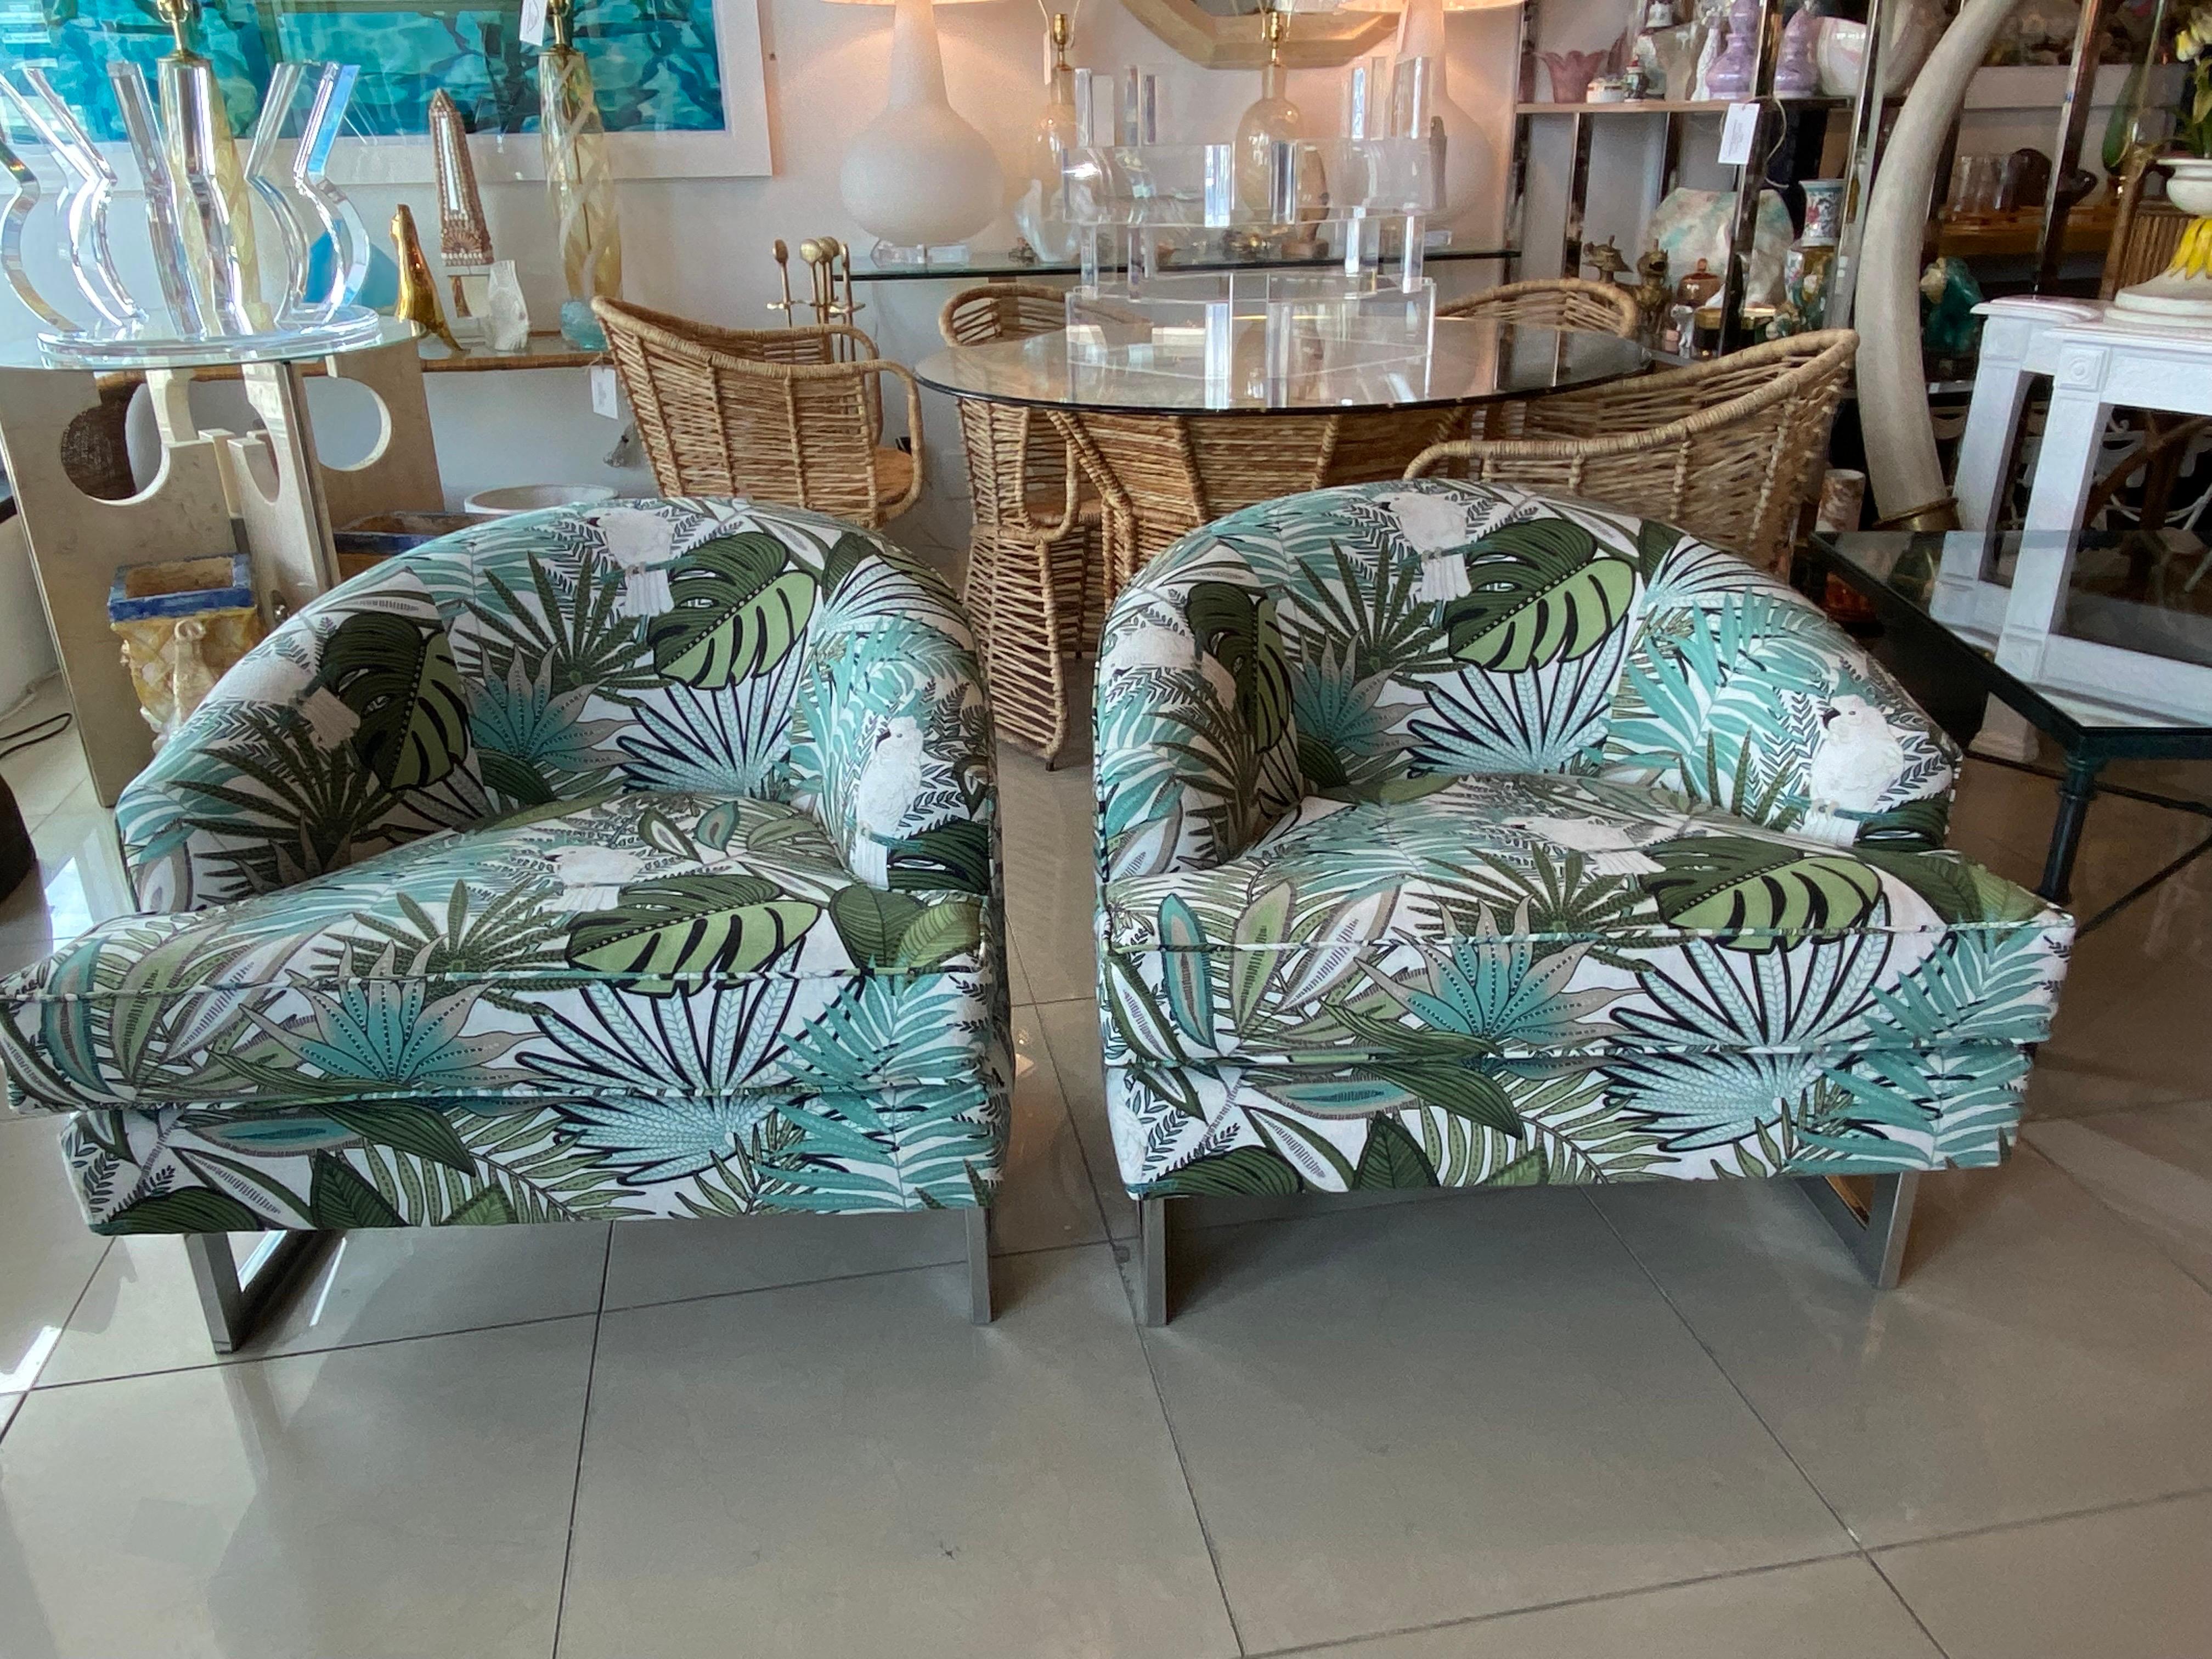 Vintage pair of amazing chrome cantilever arm chairs, tub, barrel in the style of Milo Baughman. These have been newly upholstered and all new foam inside as well. Lovely tropical cockatoo makes this tropical upholstery even more special!